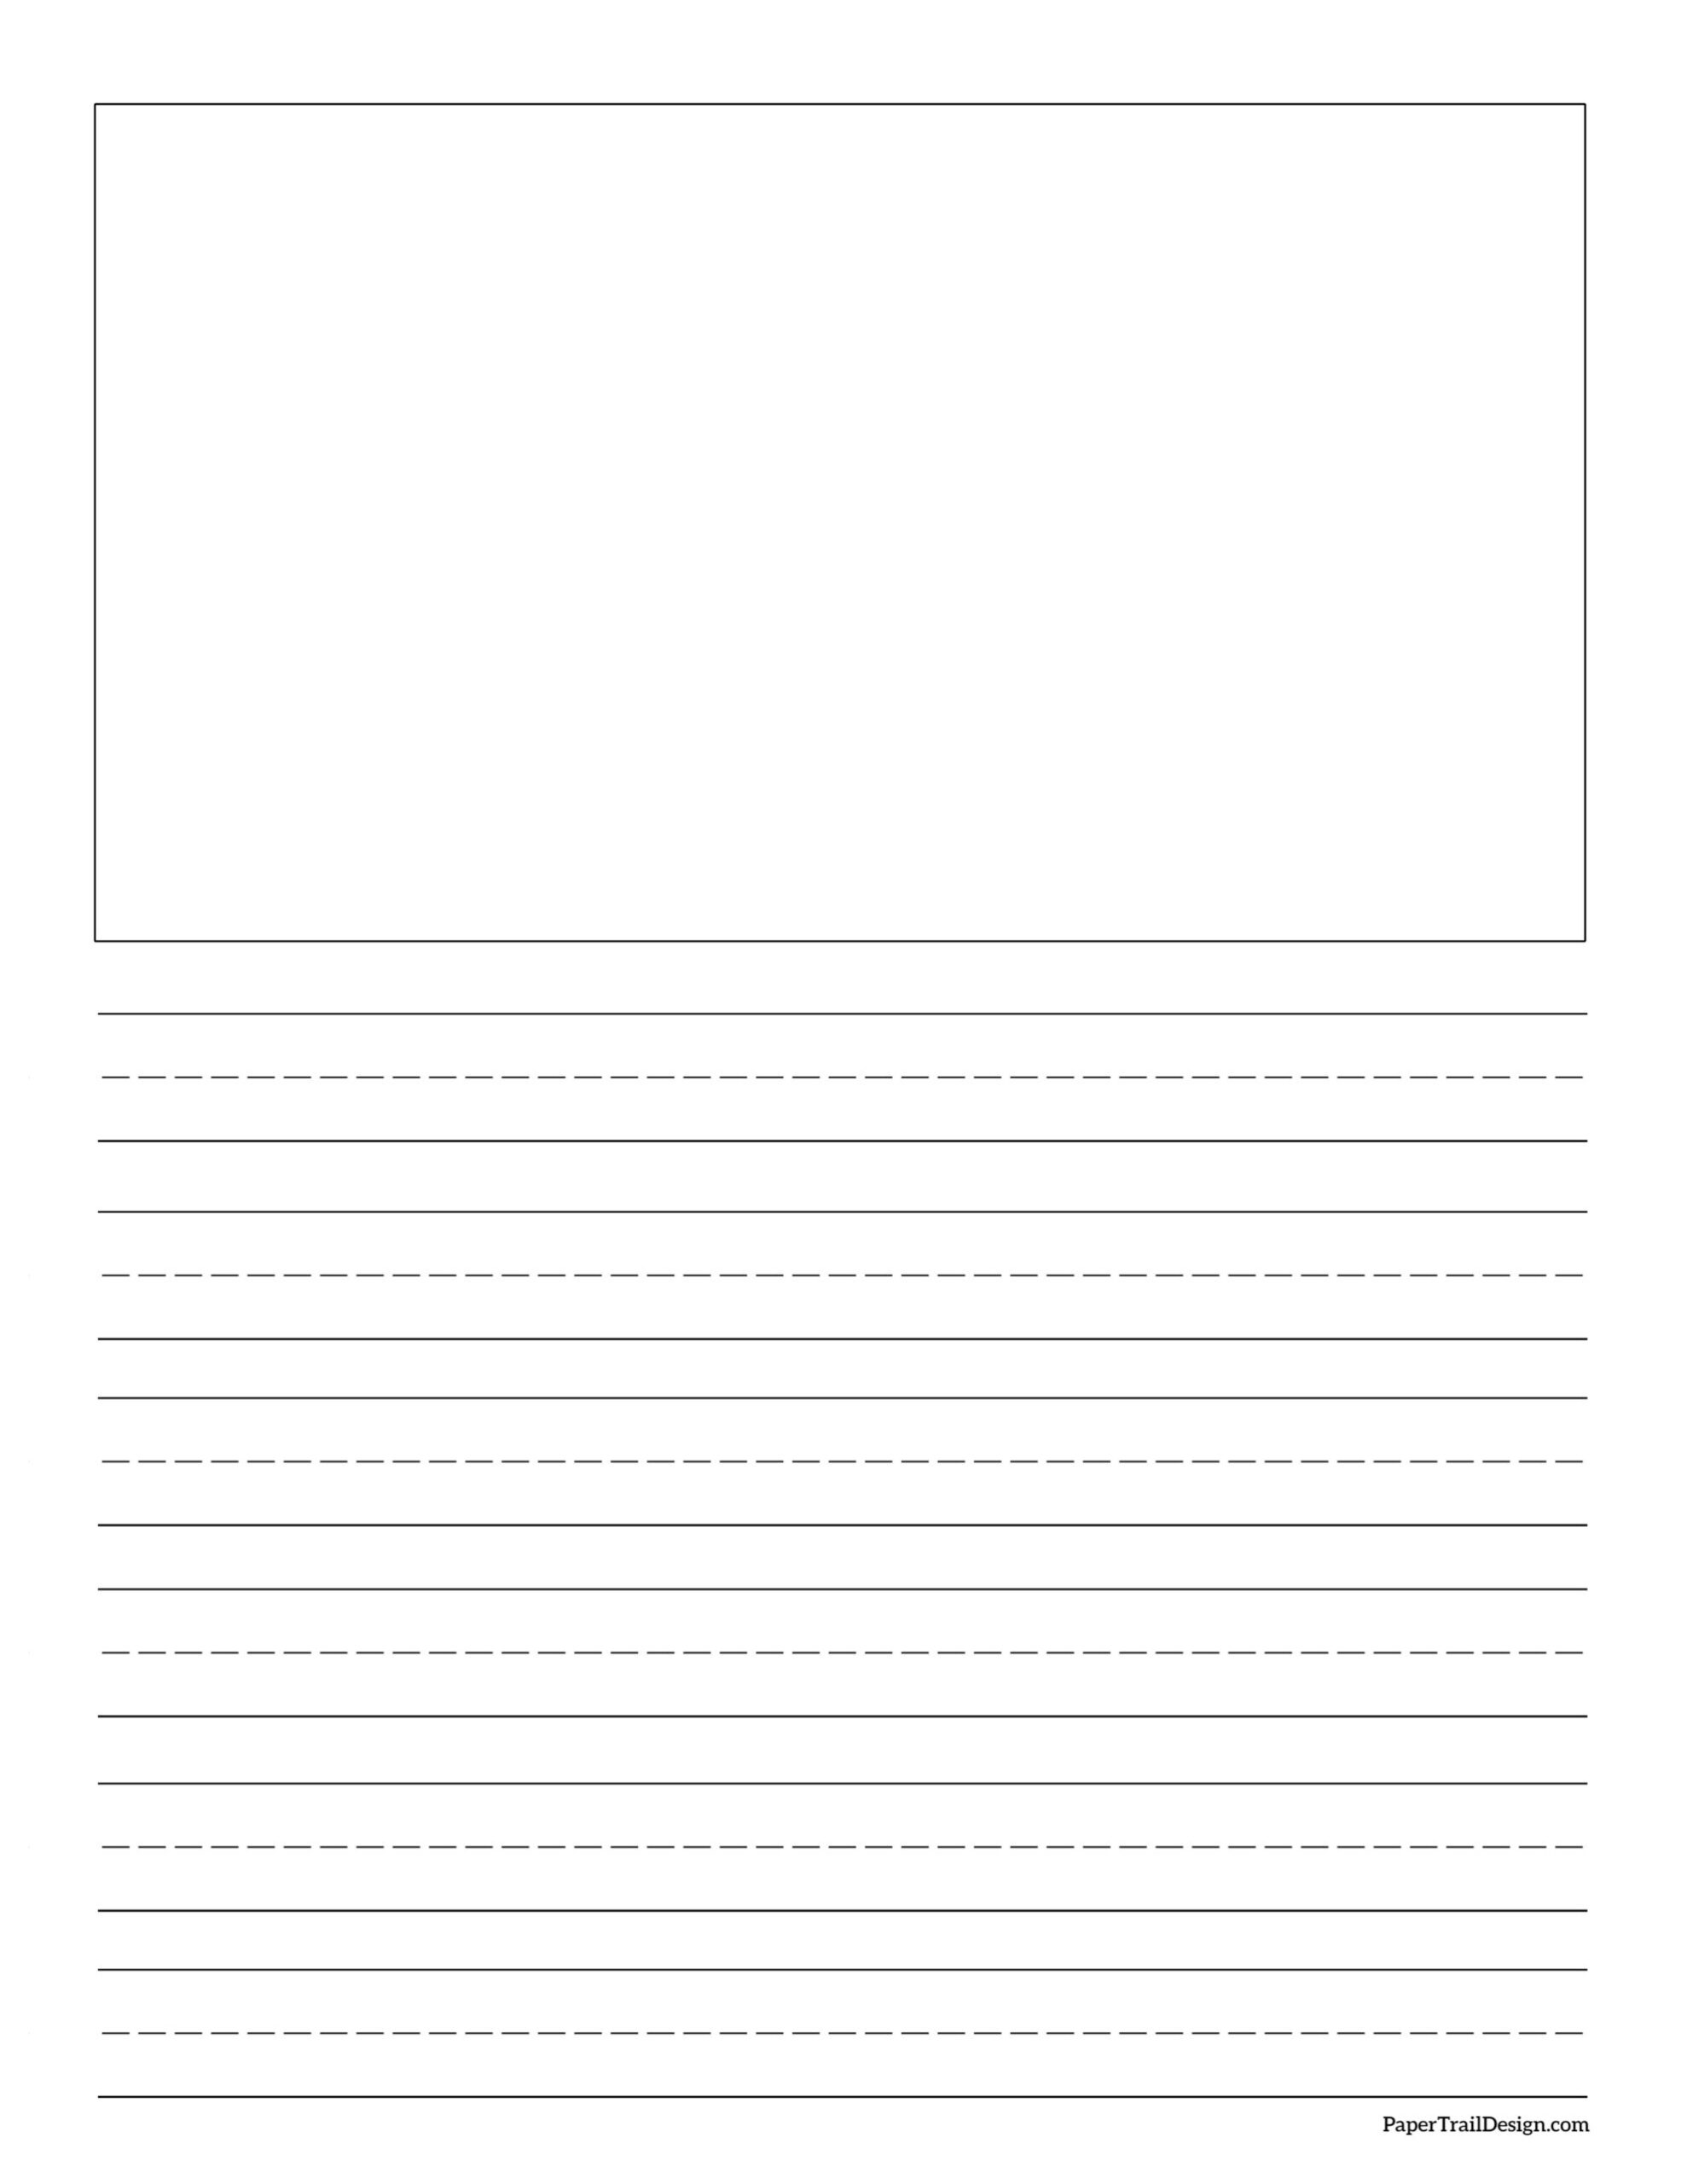 Lined Writing Paper With Drawing Box